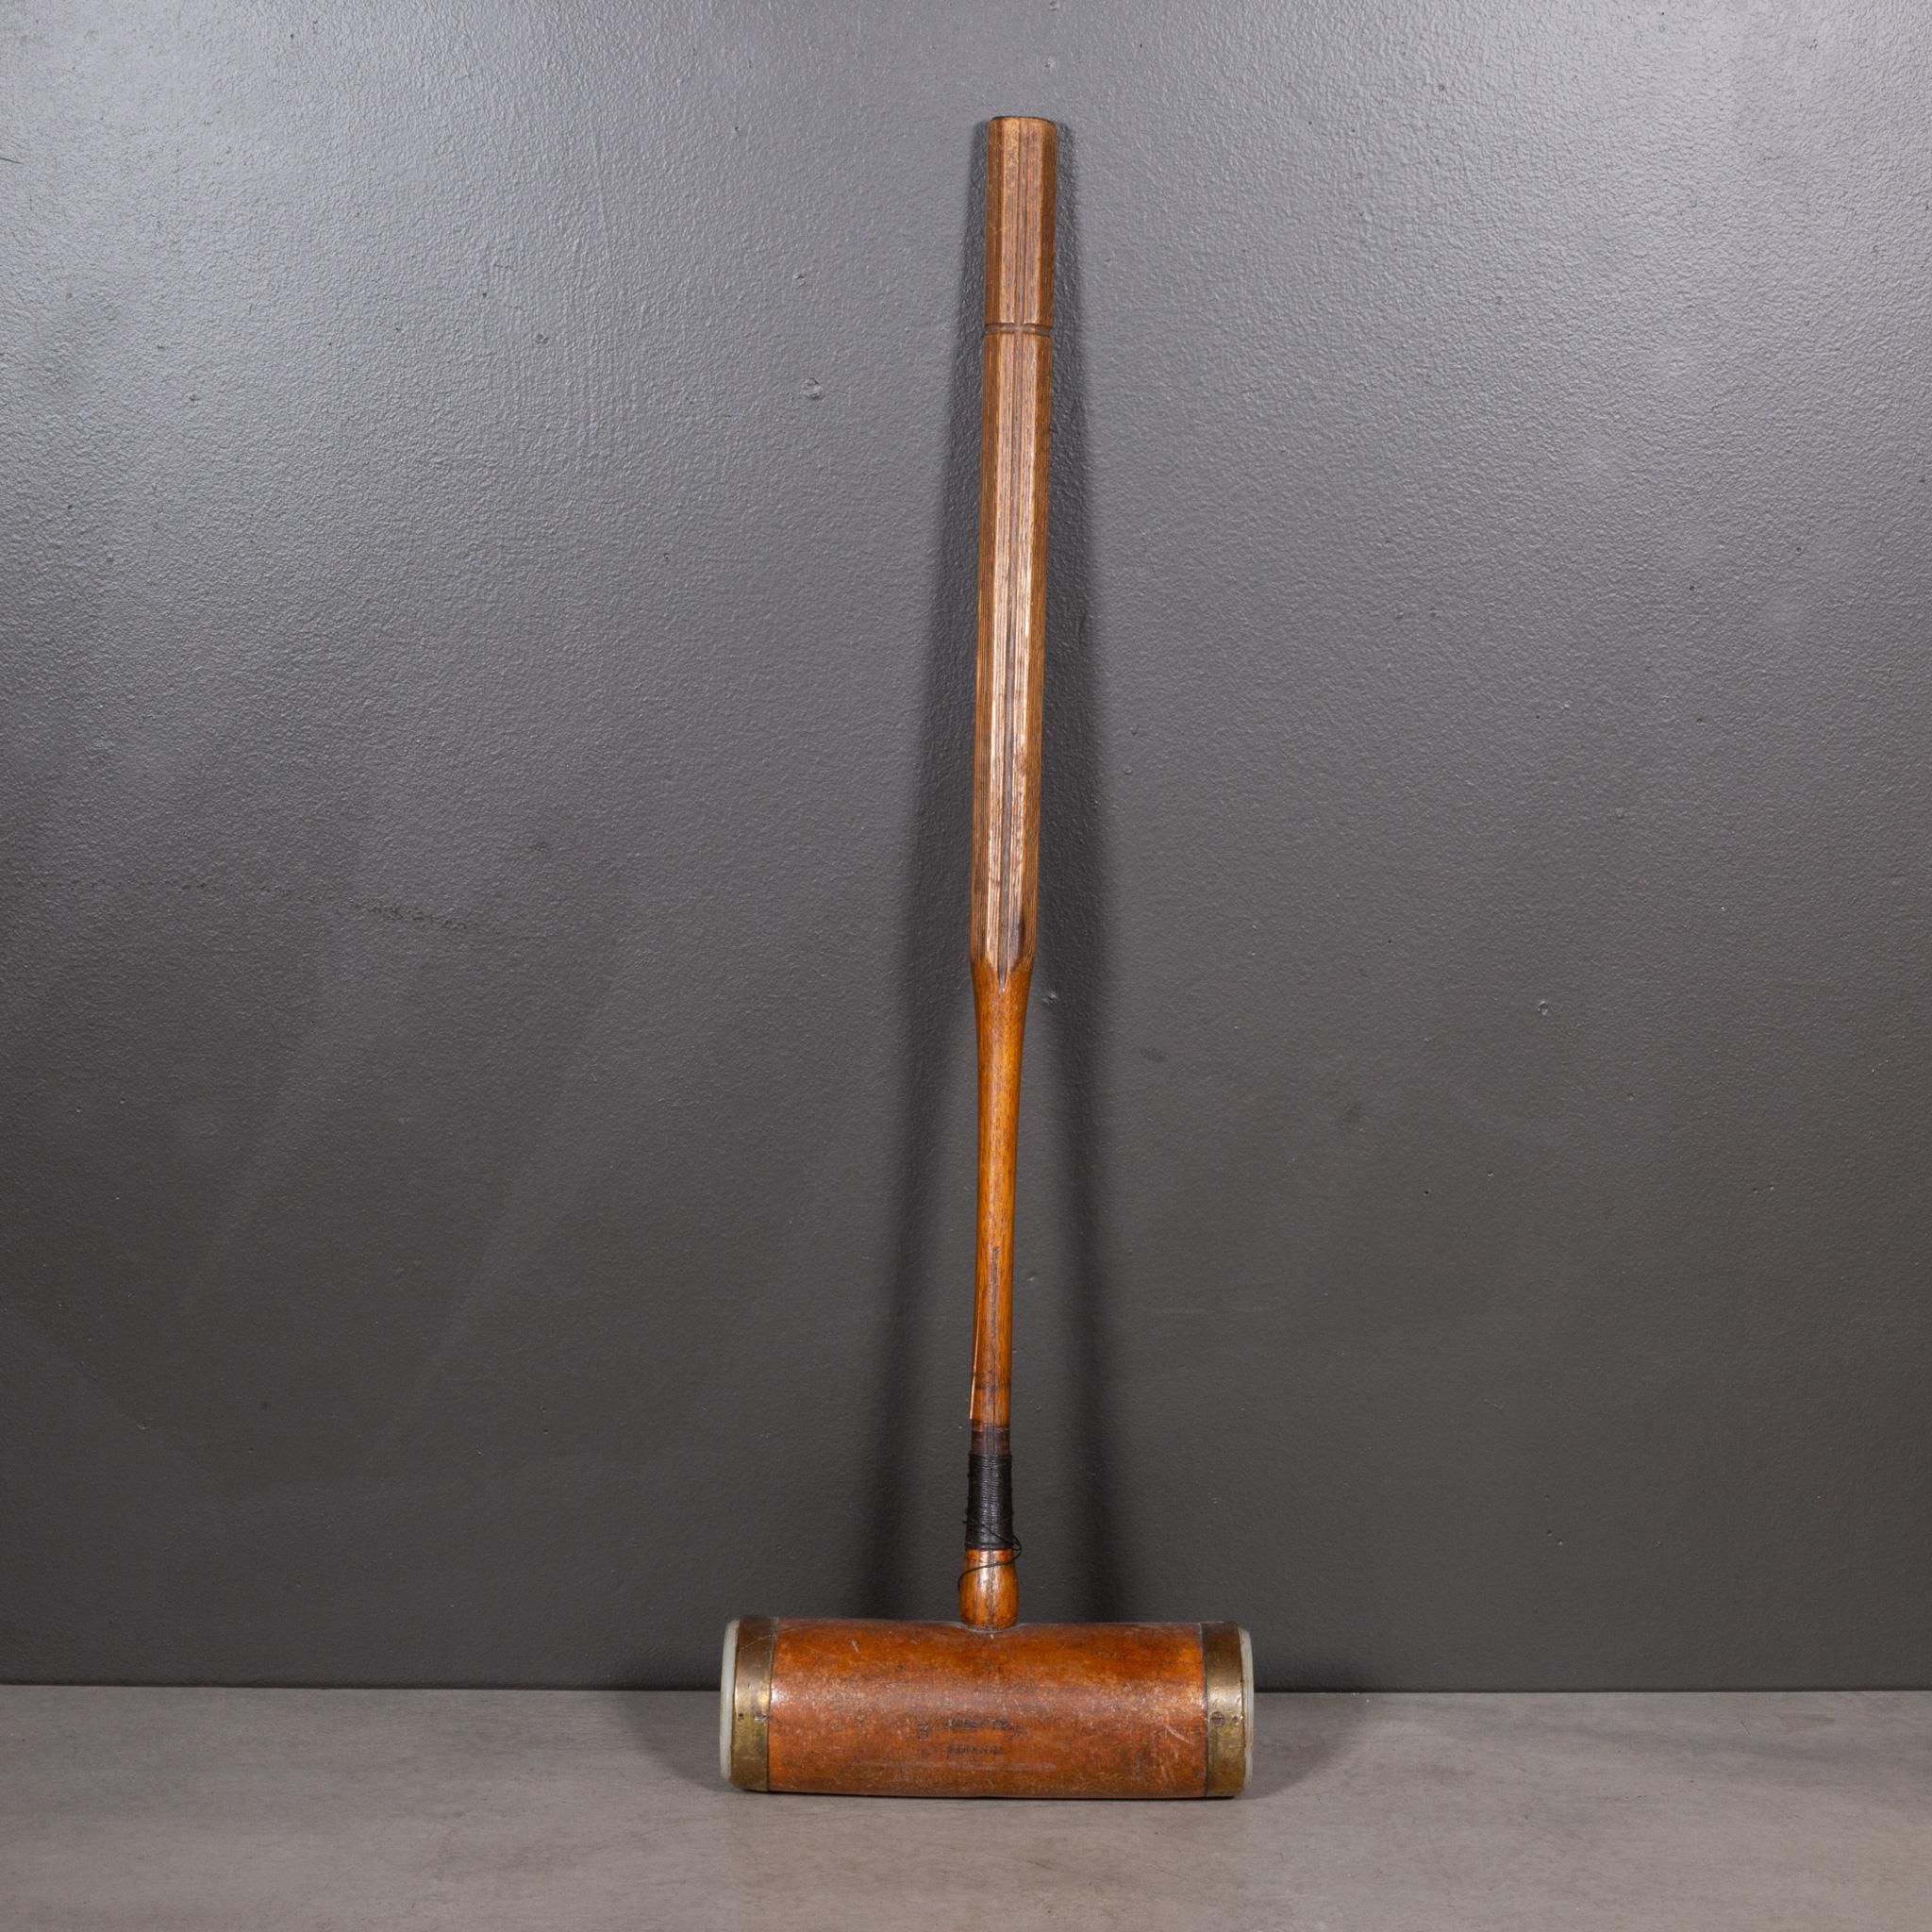 20th Century Early 20th c. Engraved Croquet Mallet c.1920